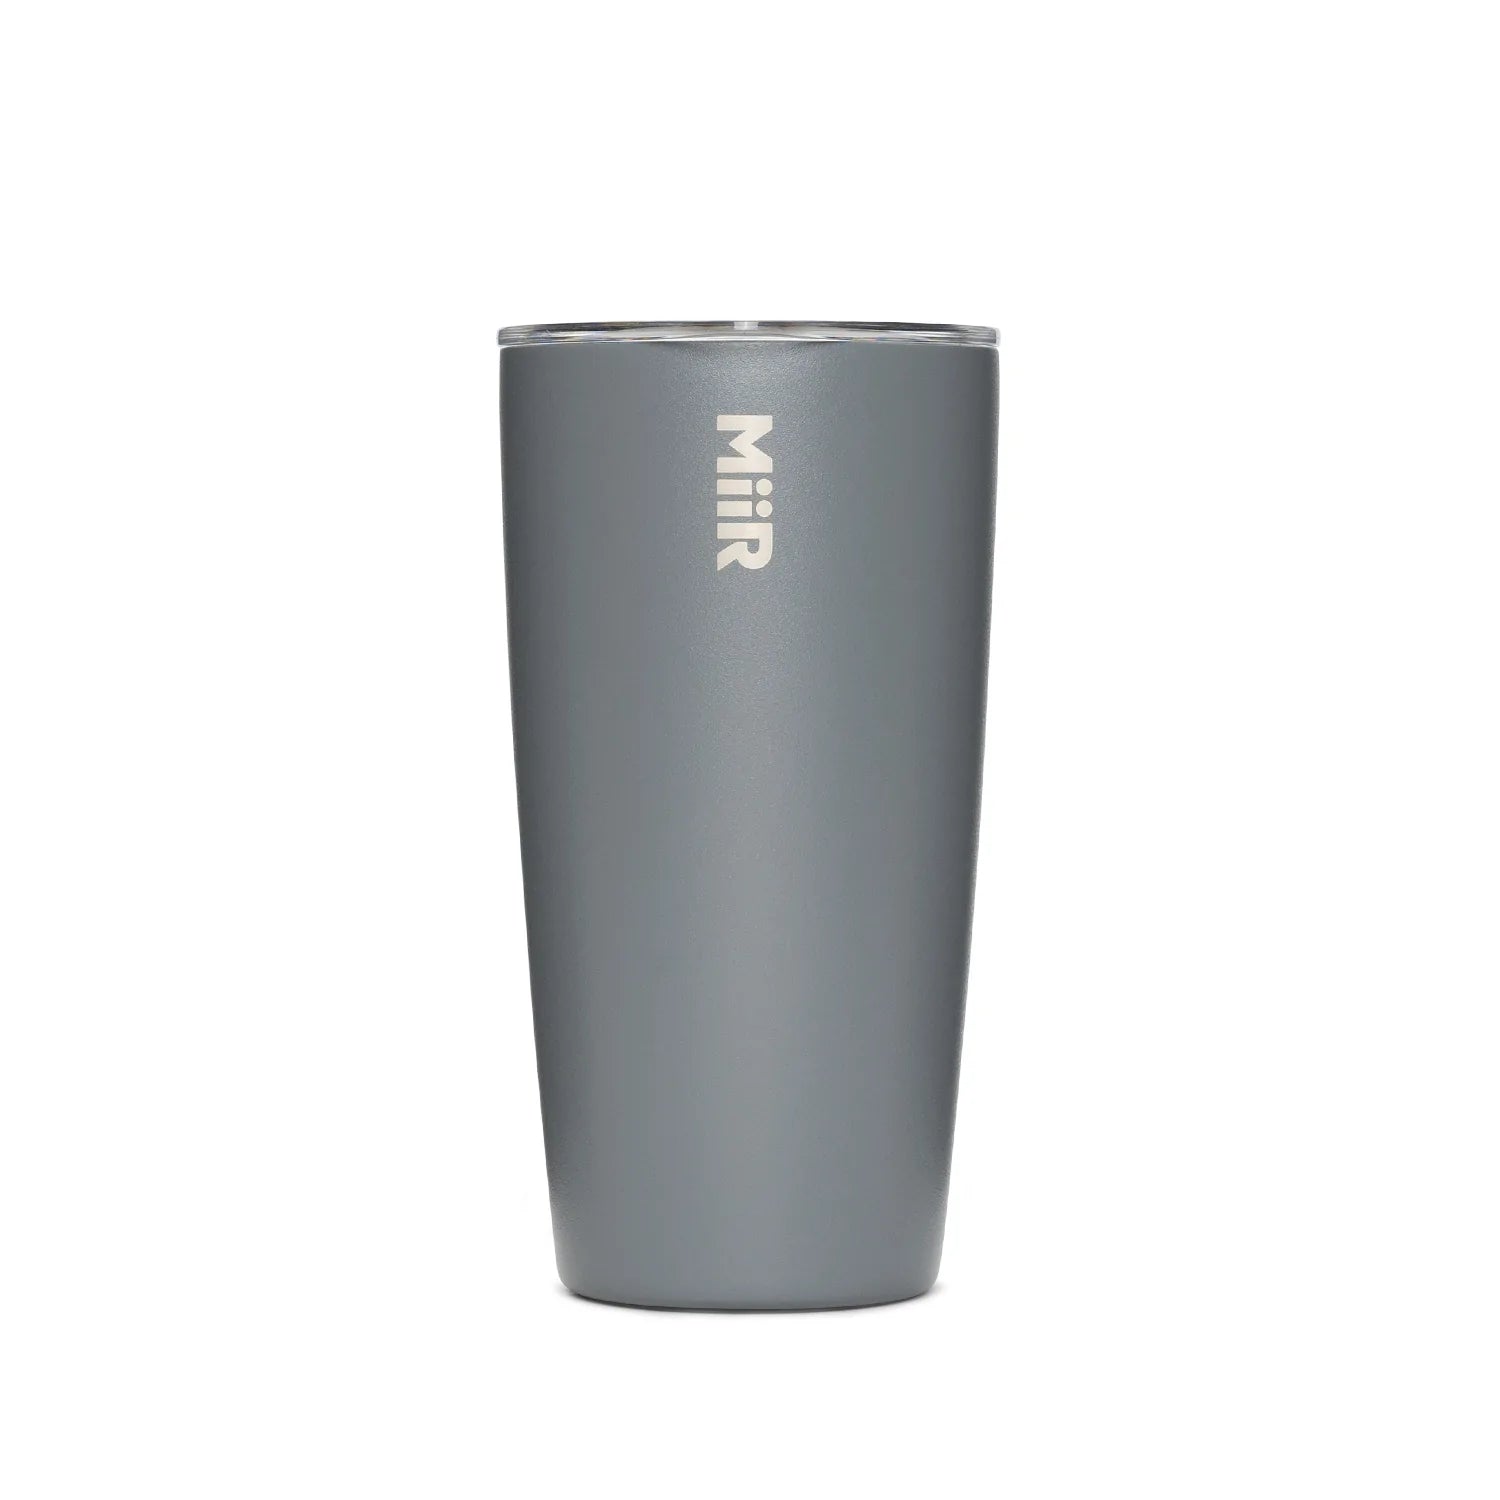 Stainless Steel Tumbler 12oz - Vacuum Insulated Tumbler & Slide Lid | Thermos Sand